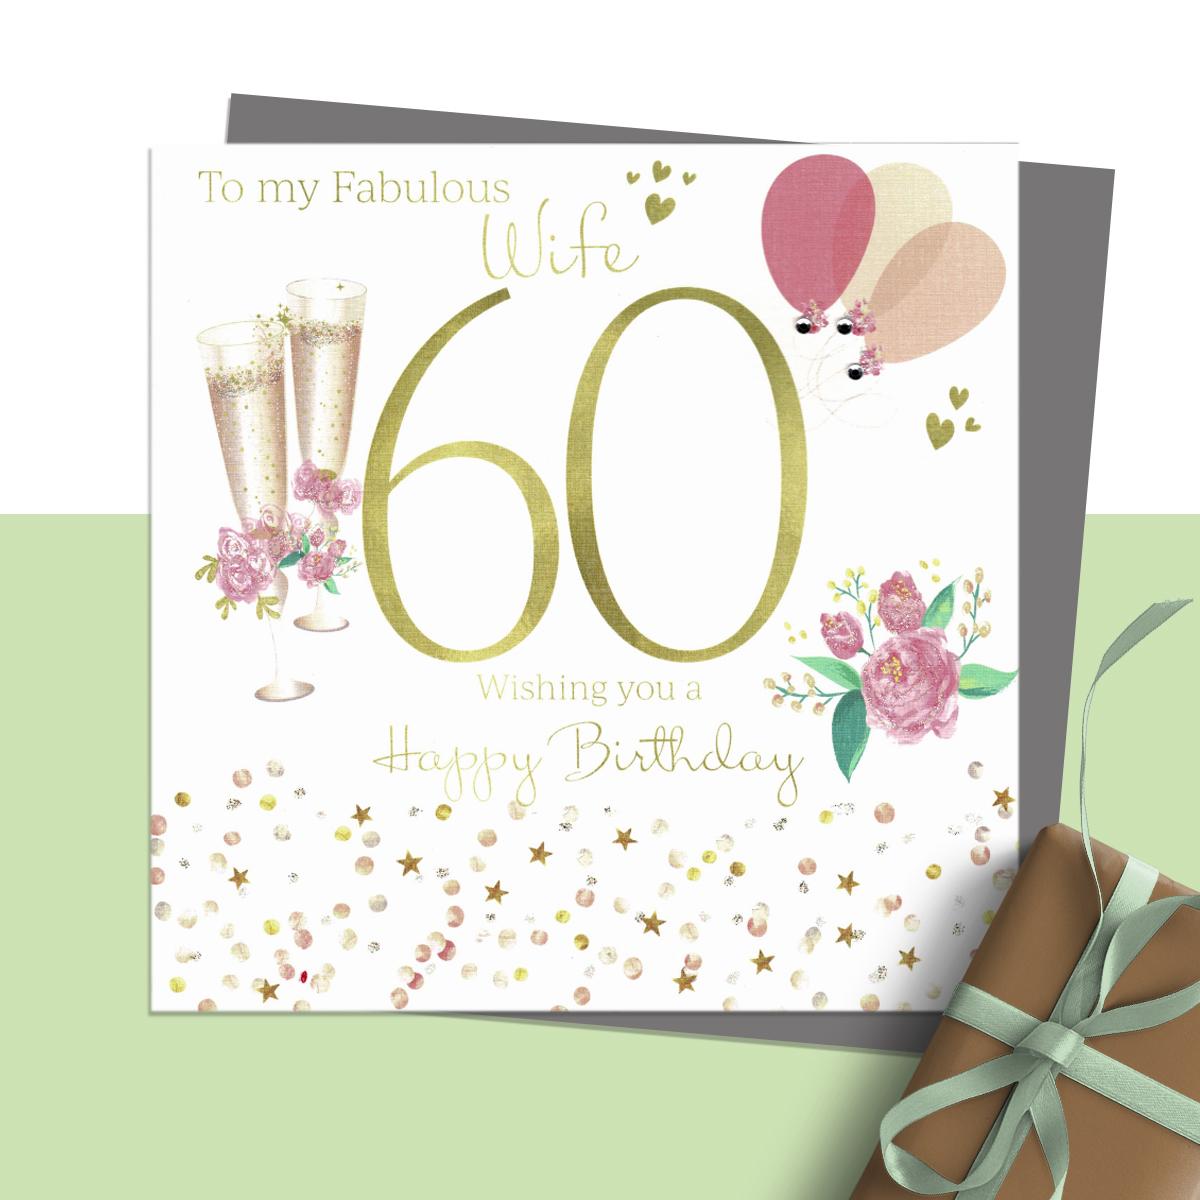 ' To My Fabulous Wife 60 Wishing You A Happy Birthday' Featuring Champagne Flutes, Flowers And Balloons. Hand Finished With Sparkle And Jewel Embellishments. Blank Inside For Own Message. Complete With Silver Coloured Envelope